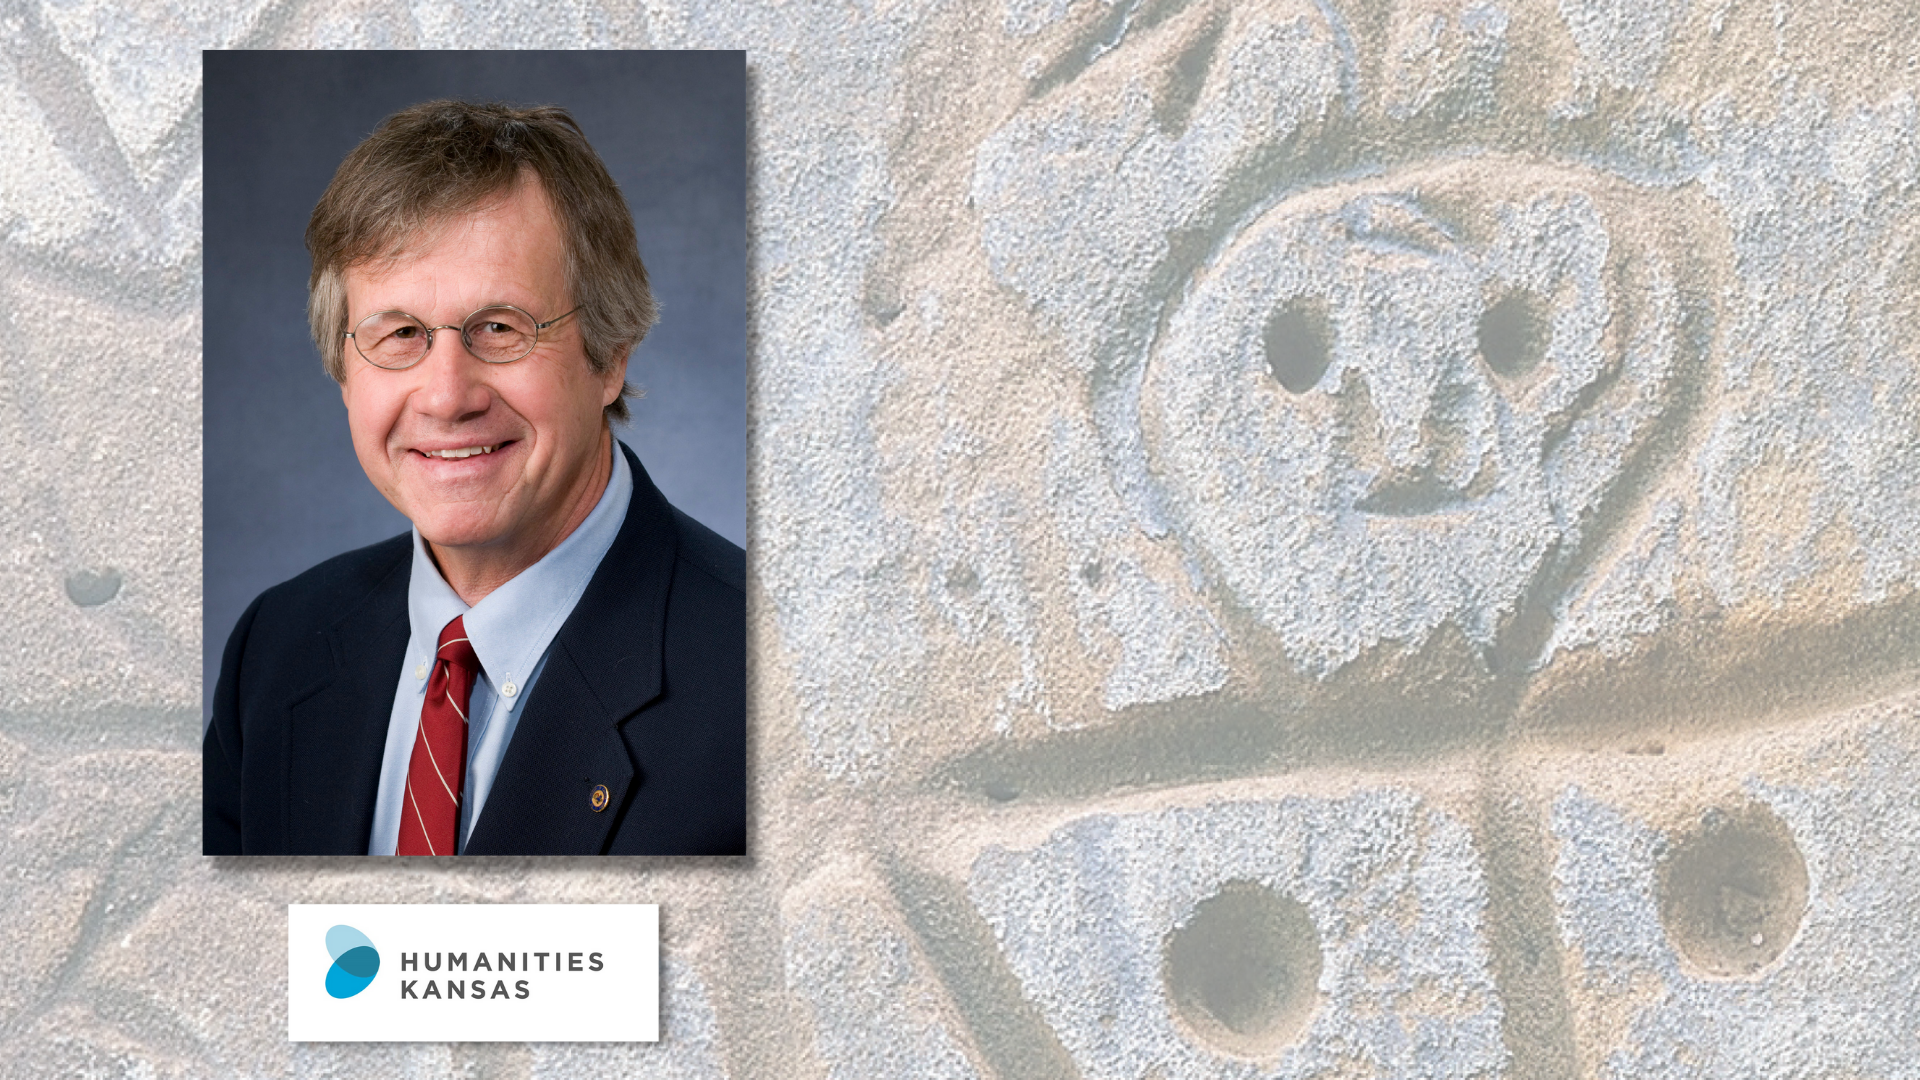 The background includes a photo of part of a petroglyph from the Kansas Smoky Hills. In the foreground is a portrait of Rex Buchanan. He is wearing a suit and tie. The Humanities Kansas logo is also featured.